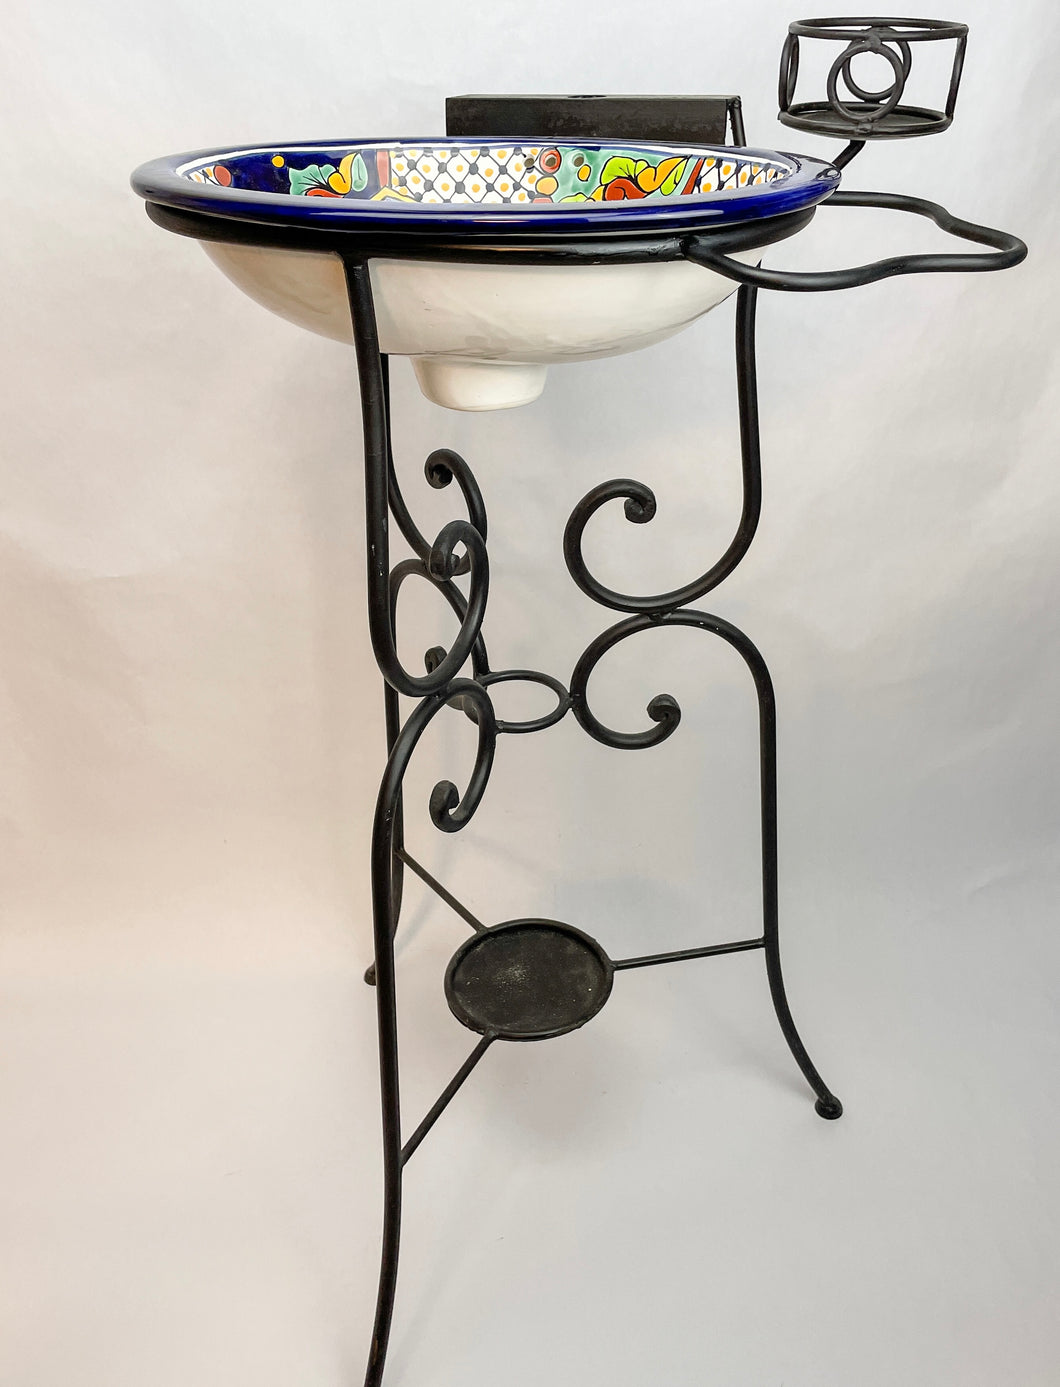 Talavera Bathroom Sink With Stand Mexican Bathroom Sinks Talavera Bathroom Accessories